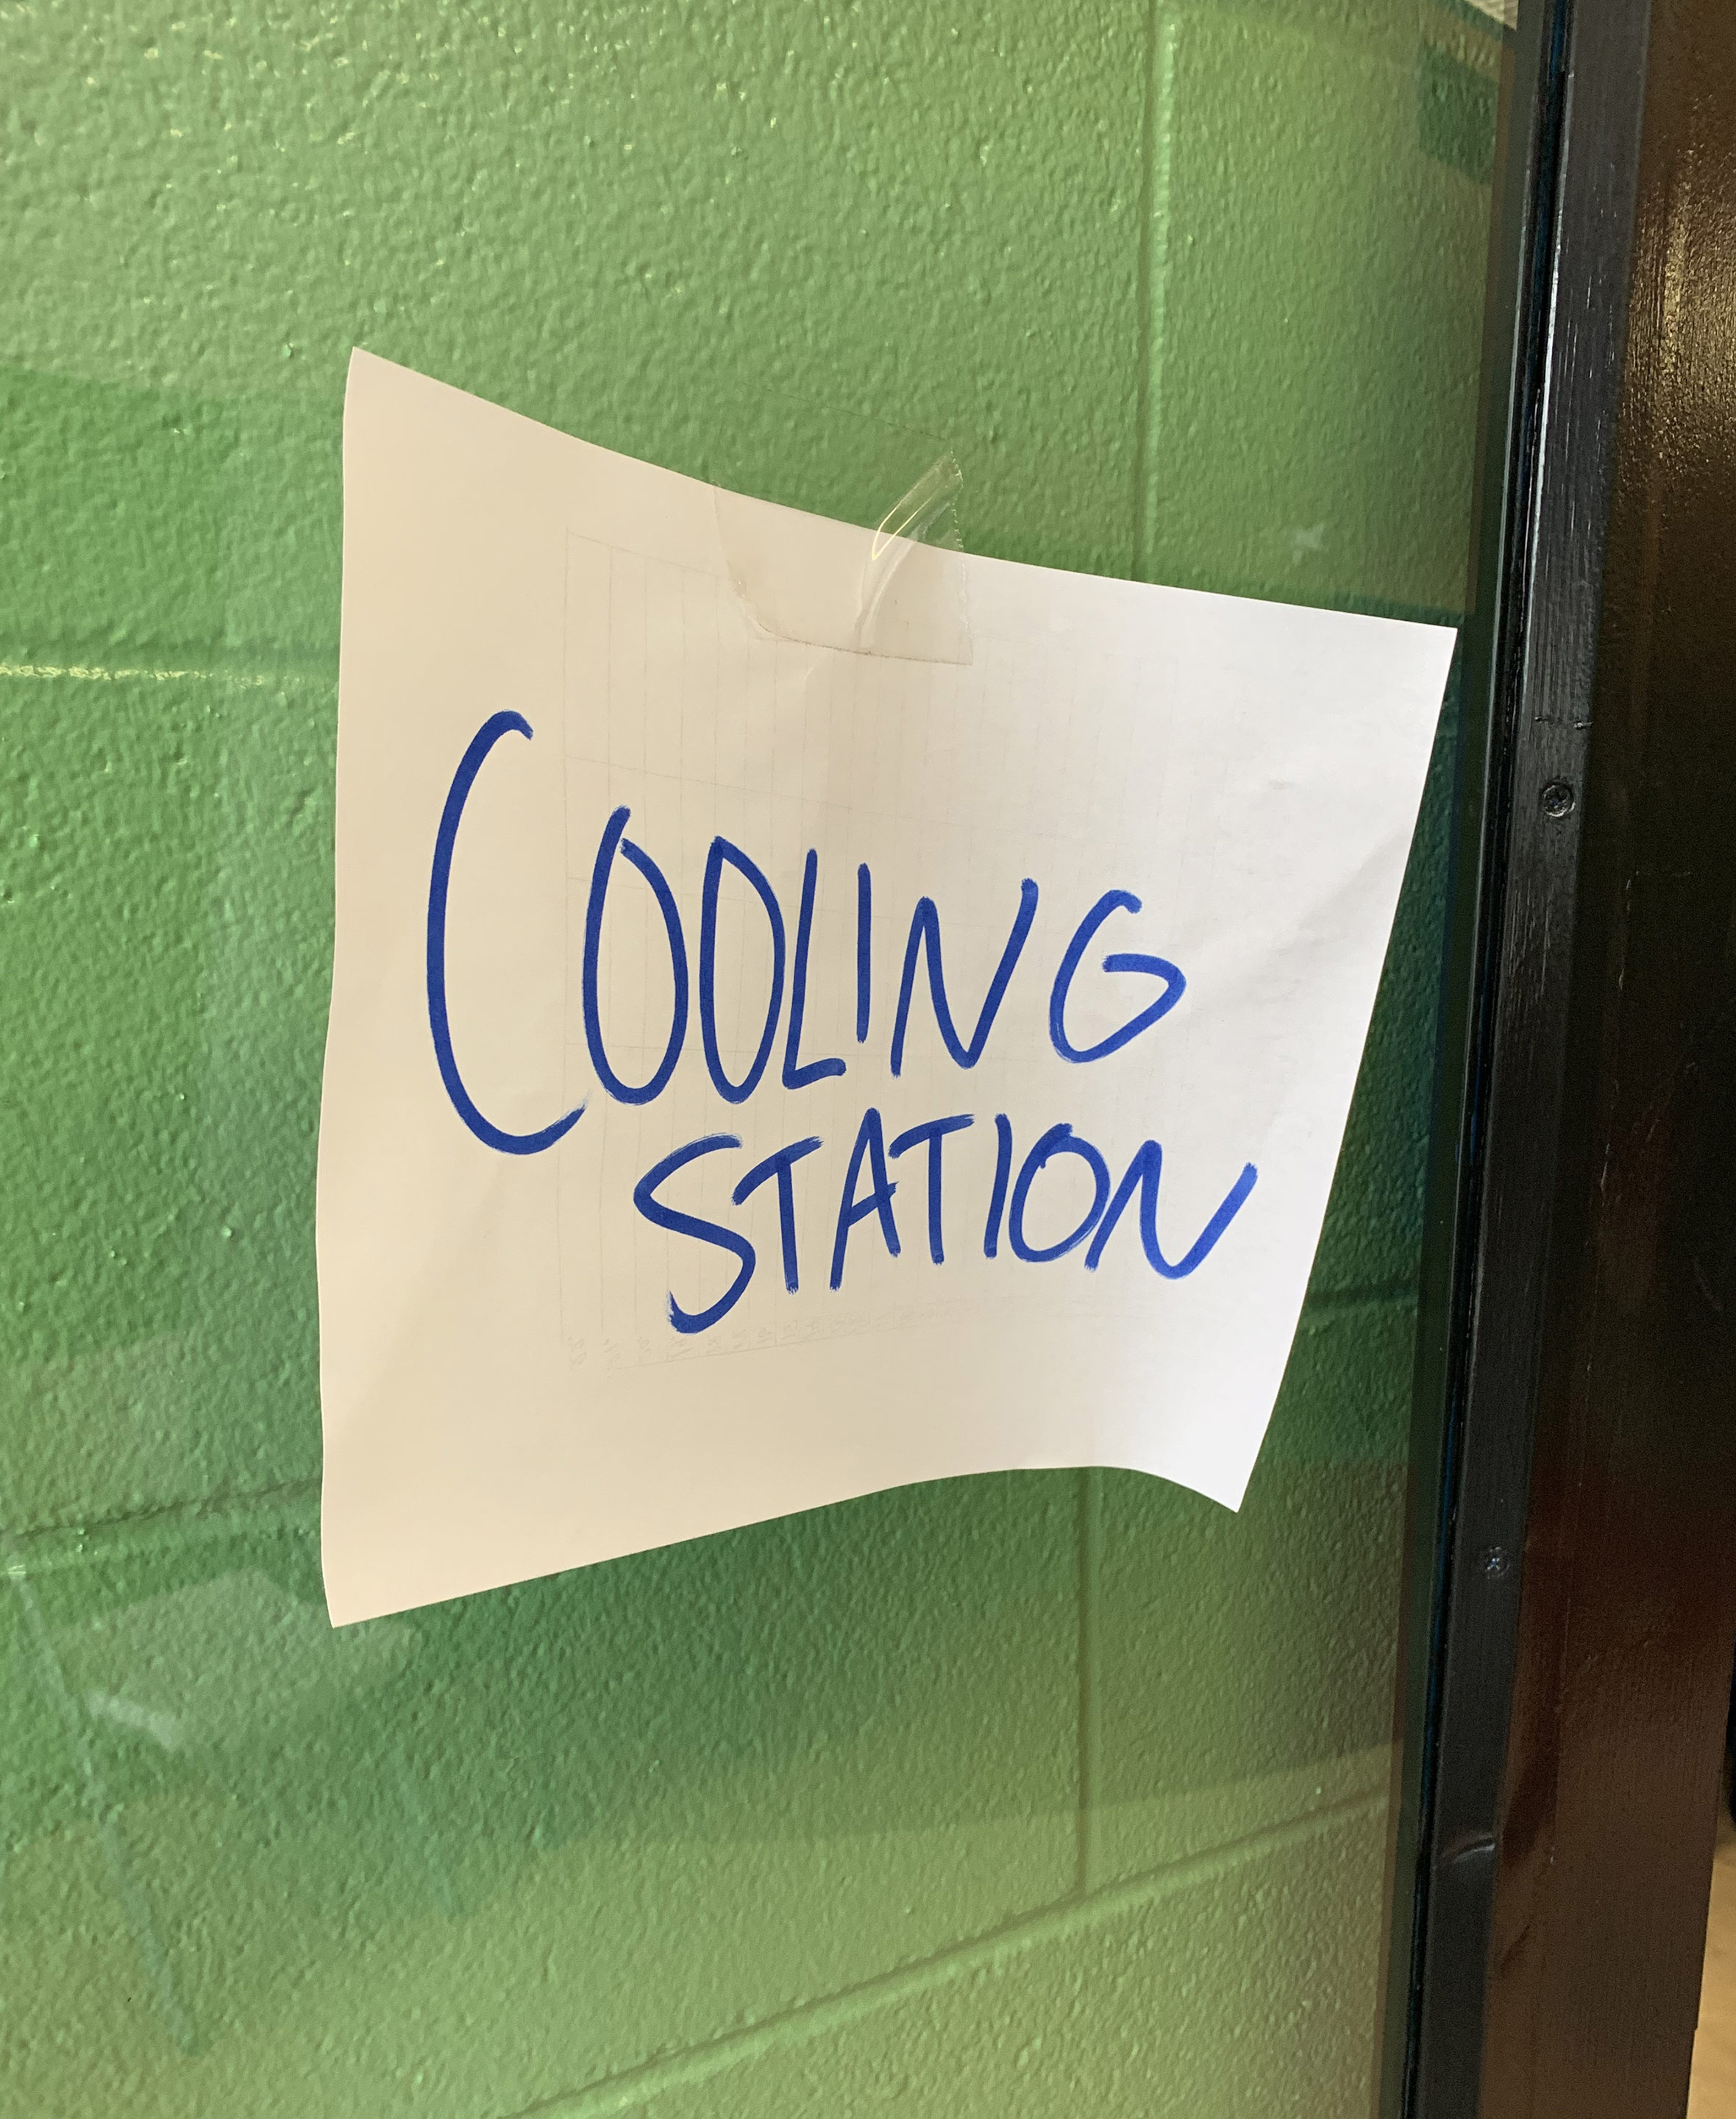 A photo of a piece of paper with writing that reads, "Cooling station."